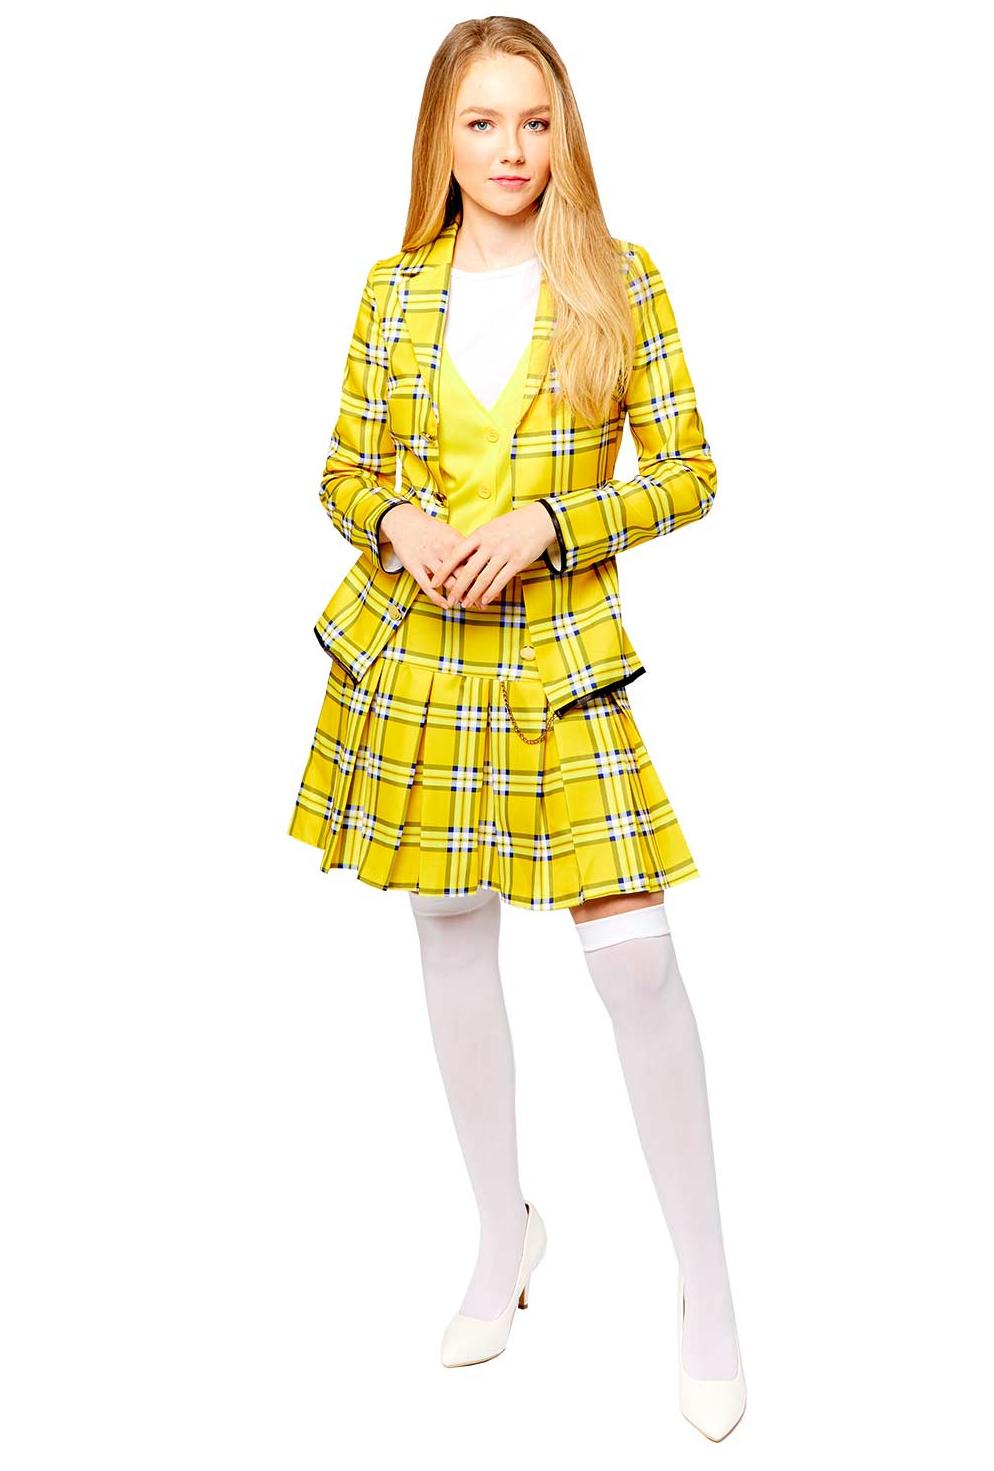 Clueless Cher Costume Amscan